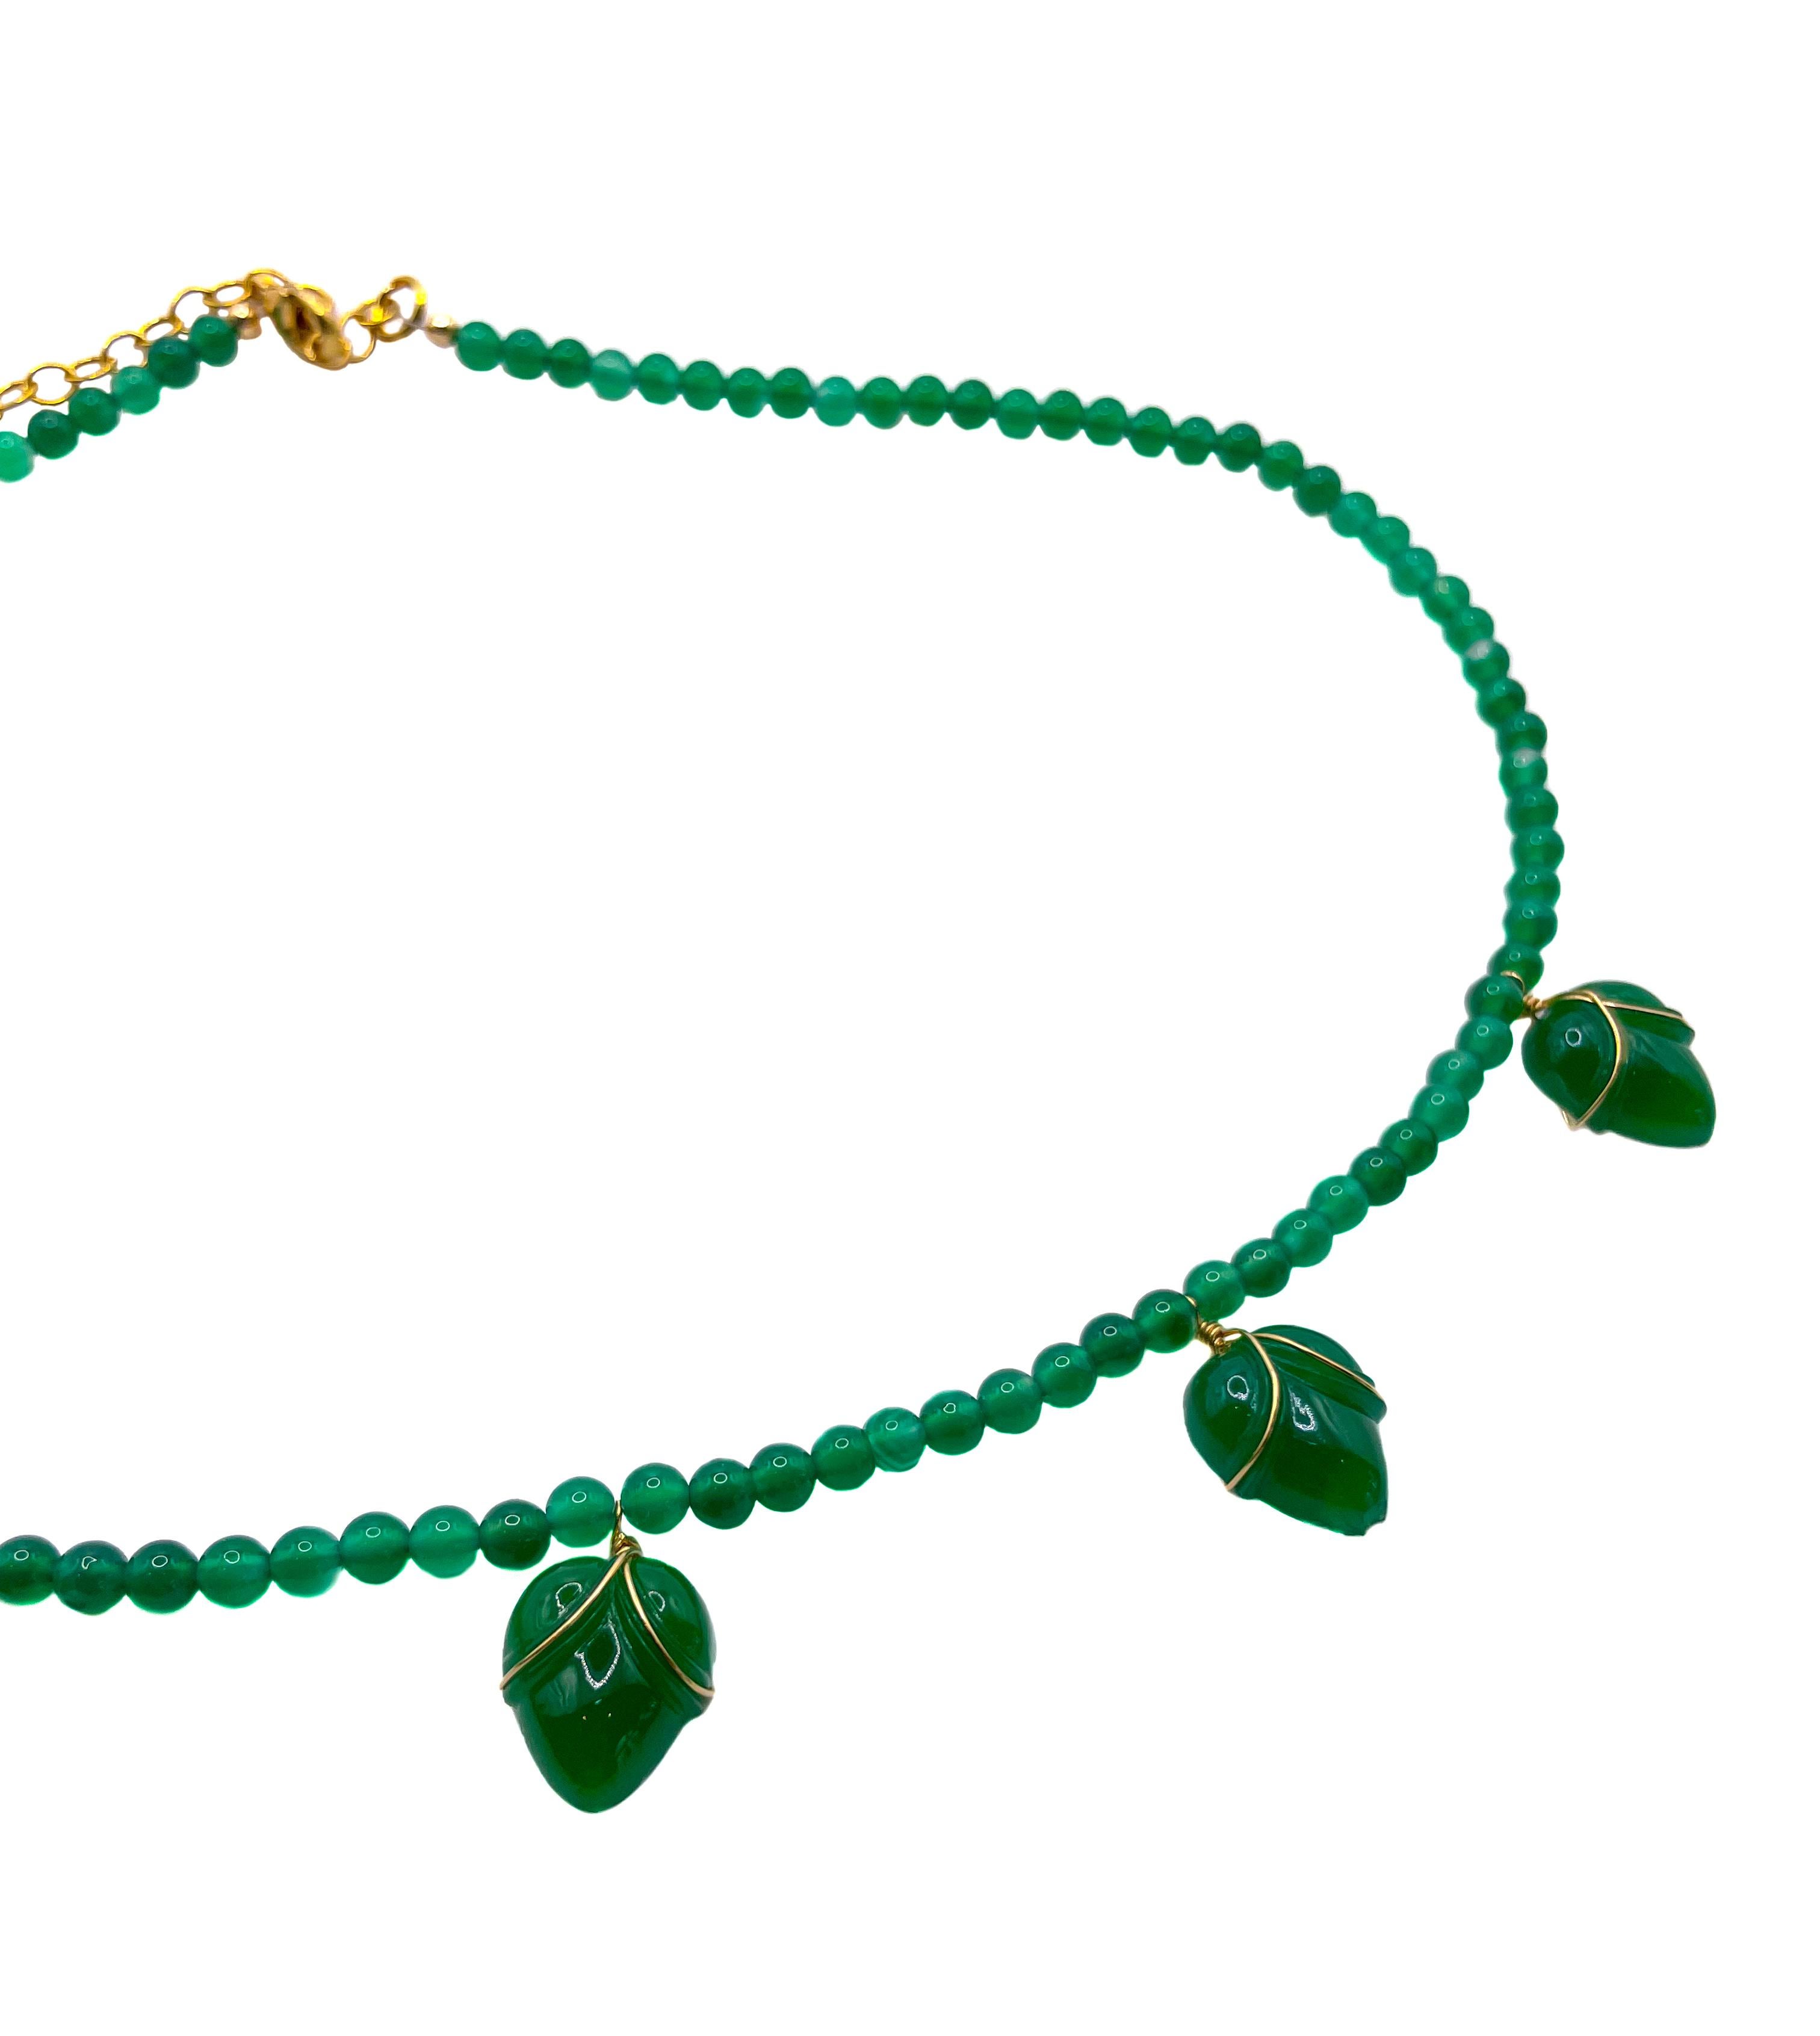 This one of a kind, striking emerald green beaded necklace displays five glass flower buds made from original vintage glass from 1950s Czech Republic. Each glass flower bud is individually wrapped with gold-filled wire and delicately separated by